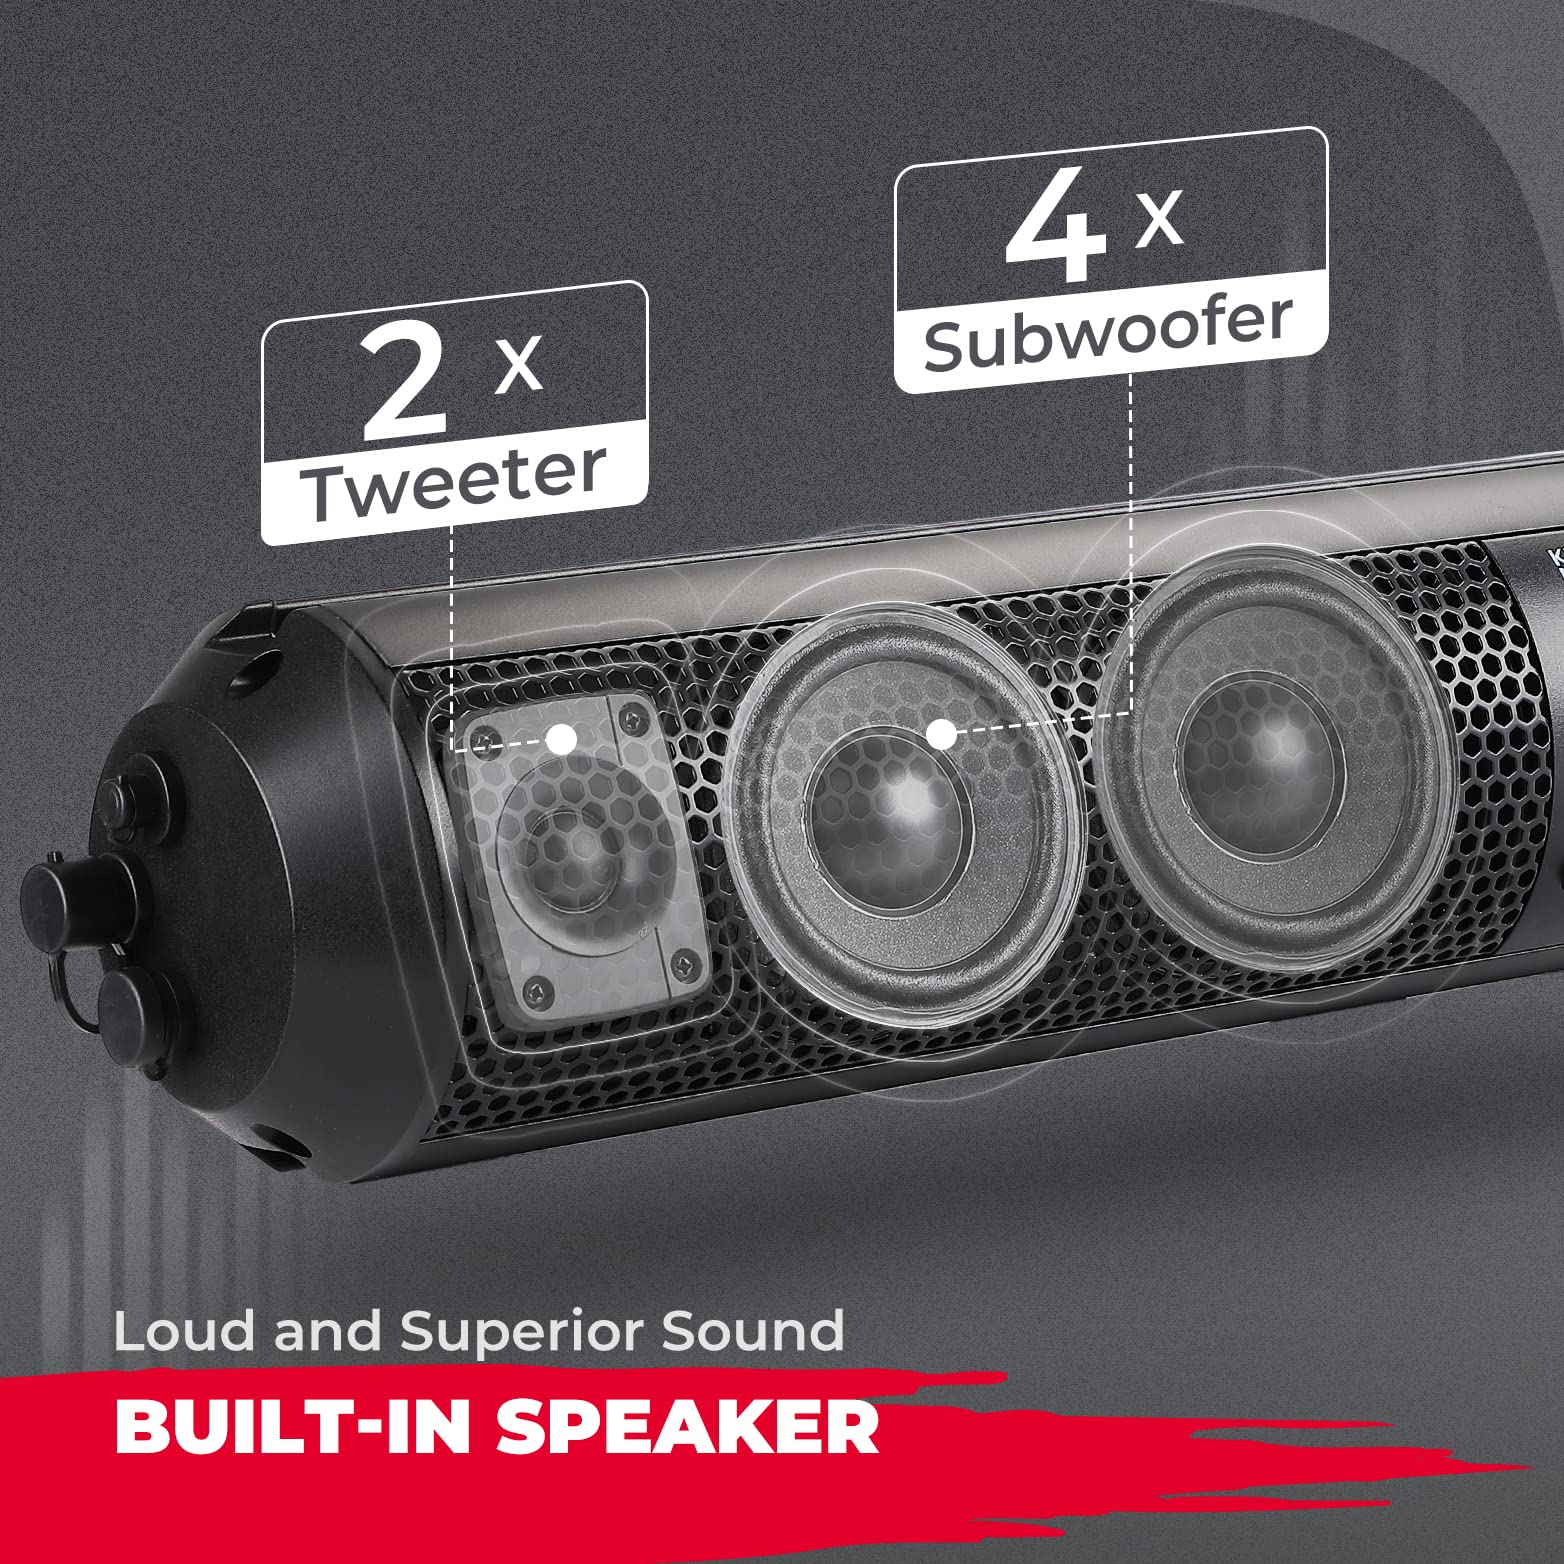 kemimoto UTV Sound Bar SXS Speaker Wireless Control Bluetooth Compatible X3 SoundBar with 2X Tweeter and 4X Subwoofer Compatible with Polaris Can am Honda CForce, for 1.56